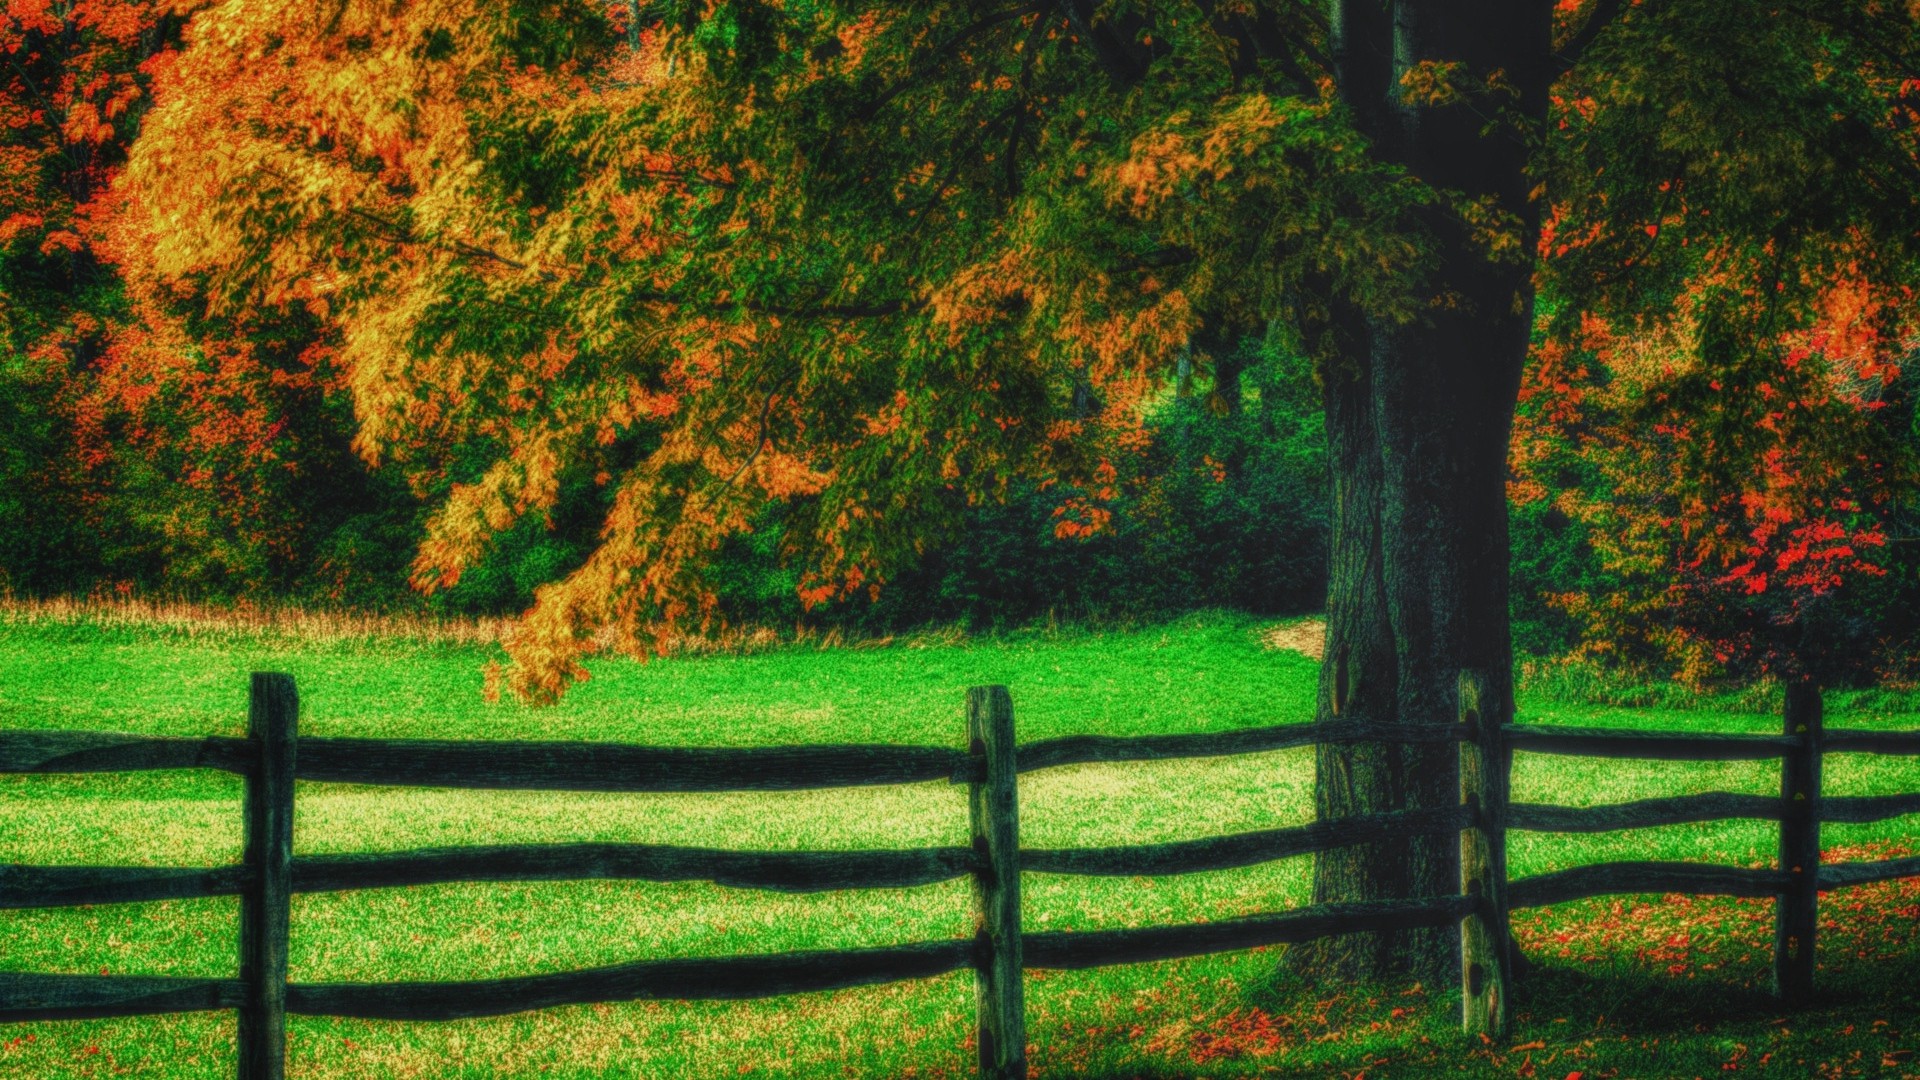 1920x1080 wallpapers: fencing, tree, green, art (image)